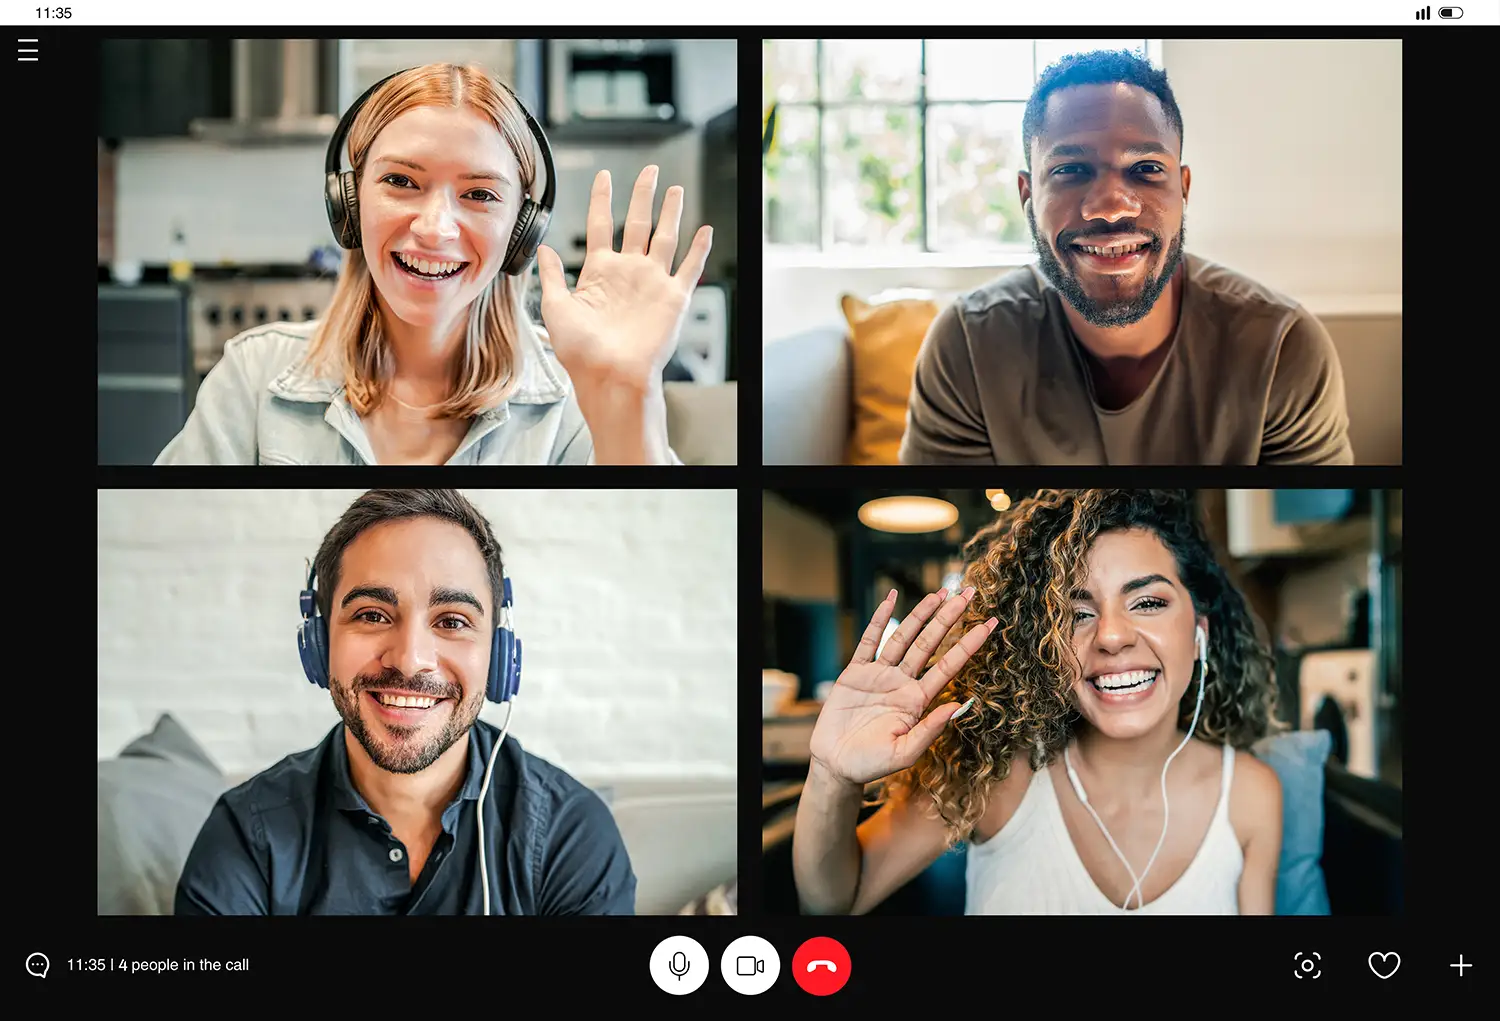 Employee engagement tips for remote teams